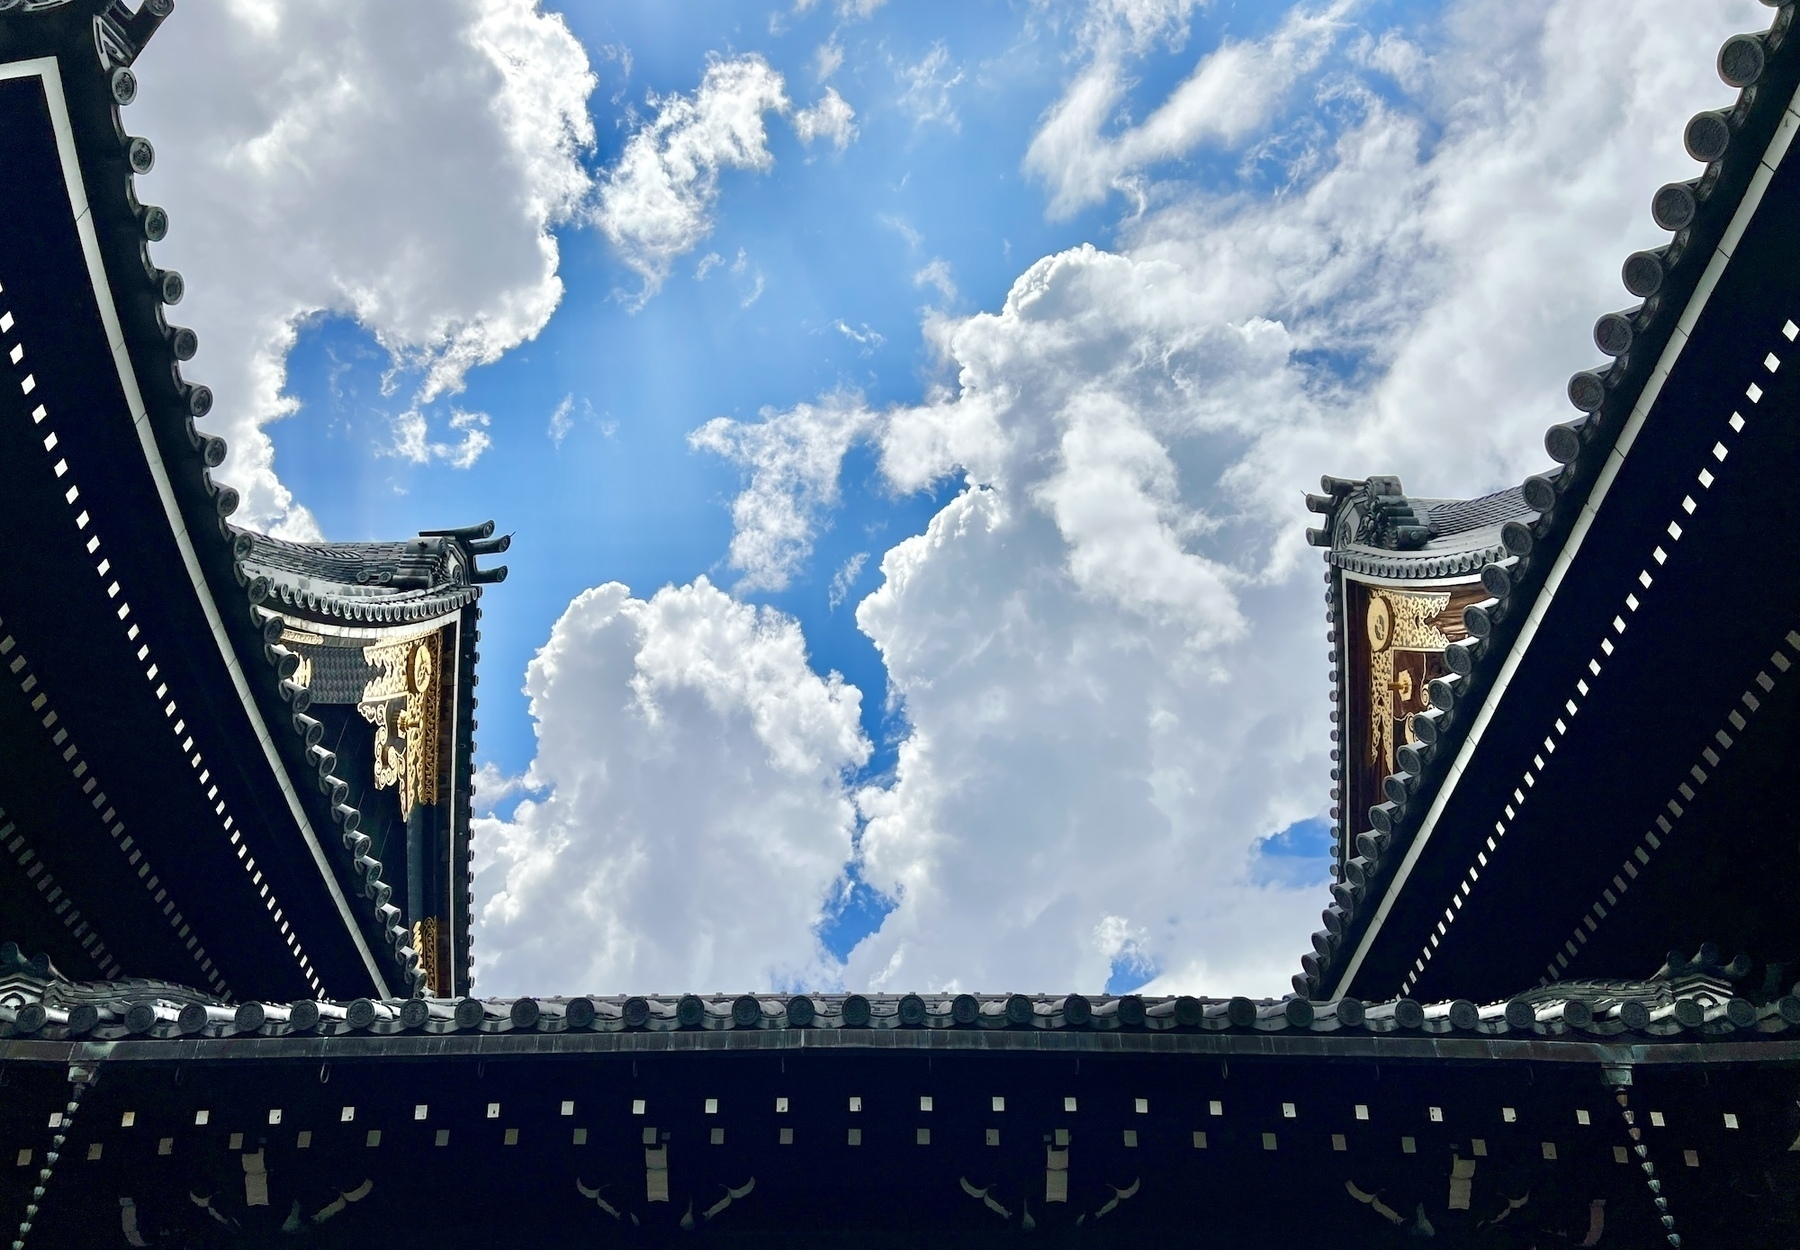 Between two temple eaves with shining brass details, the sky is filled with highly defined puffy white clouds that look like they are illustrated